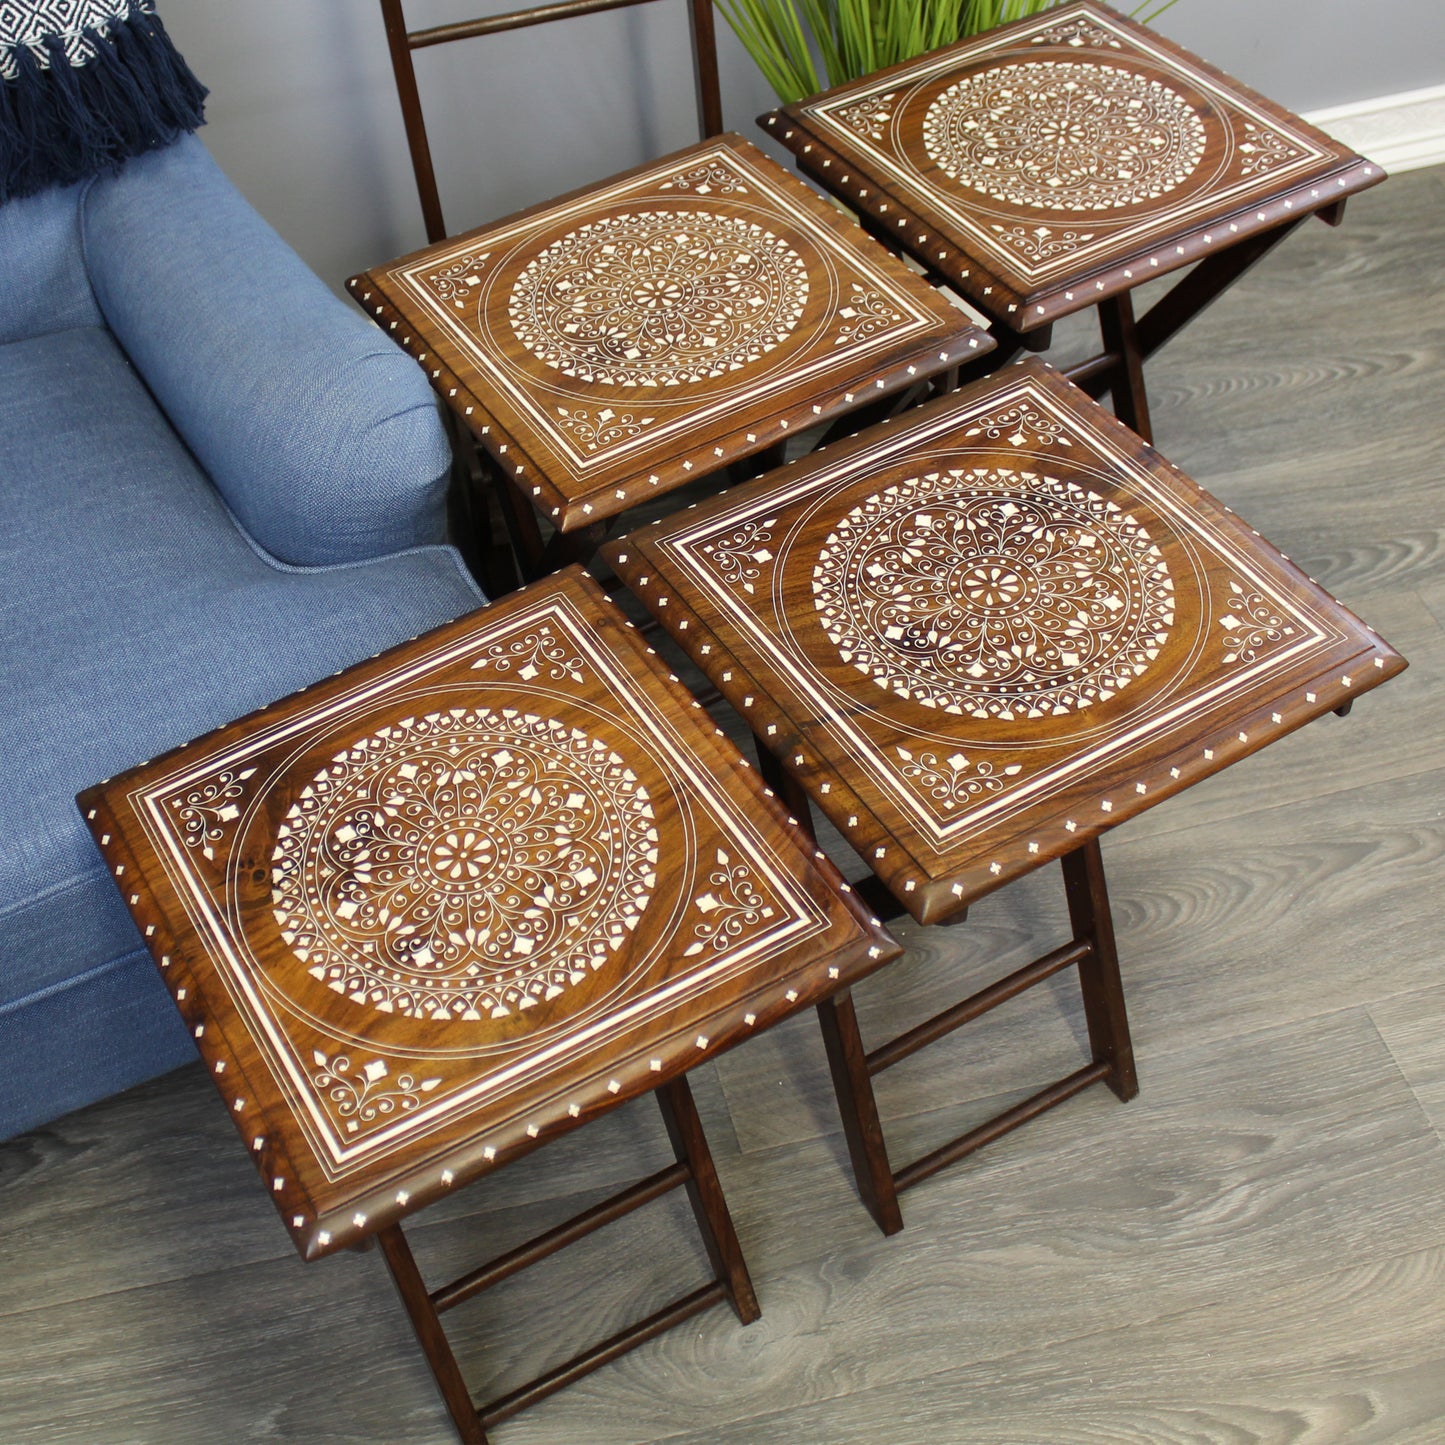 Natural Geo Decorative Rosewood Set of 4 Tray Tables with Stand - White Circle